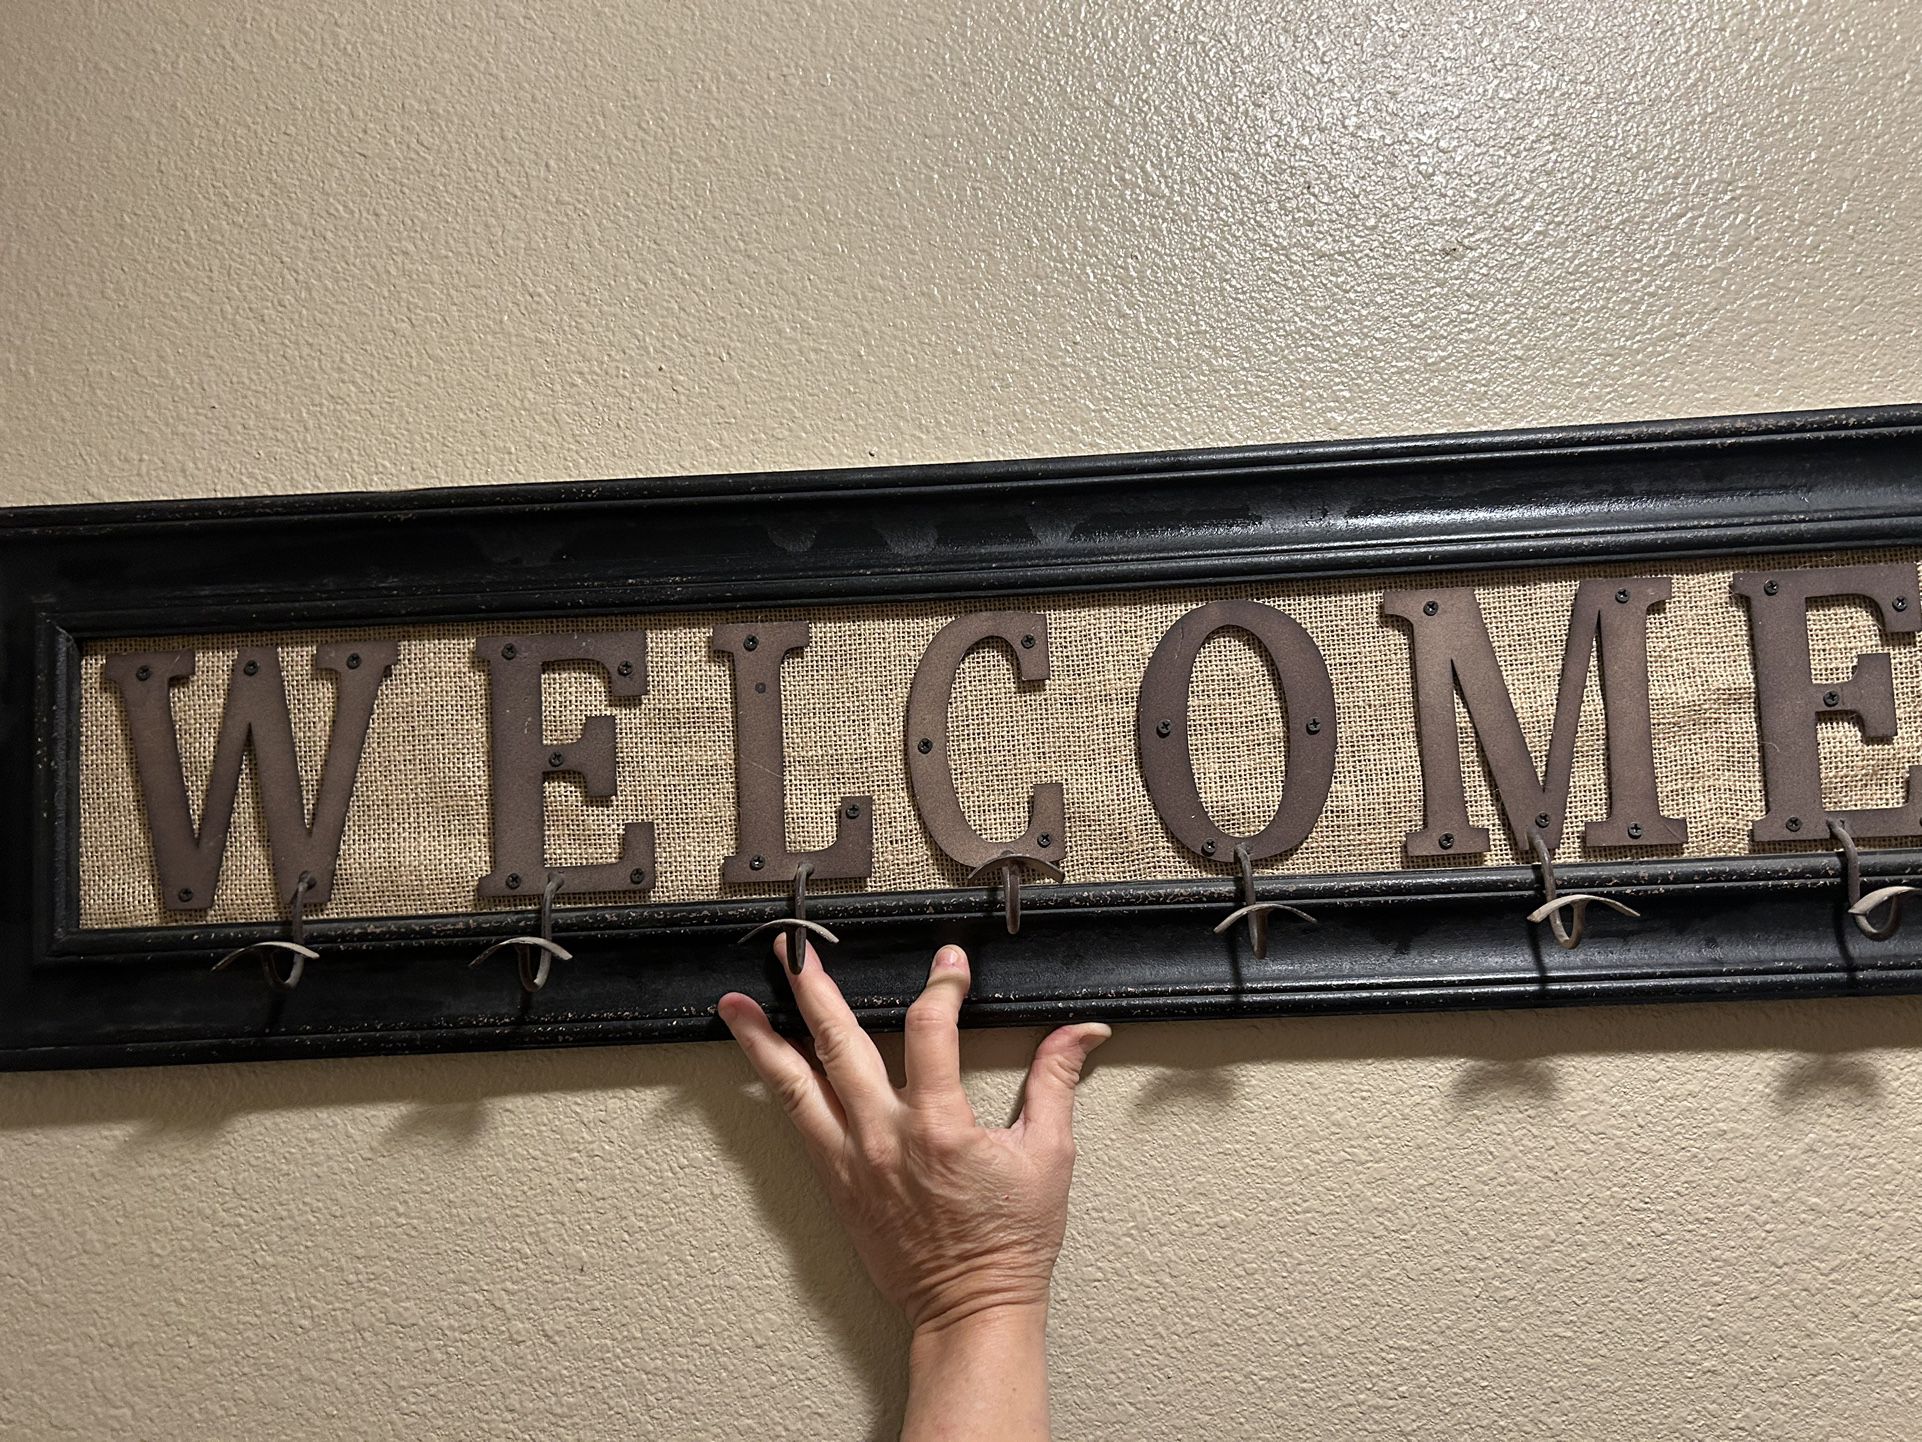 Welcome Sign 